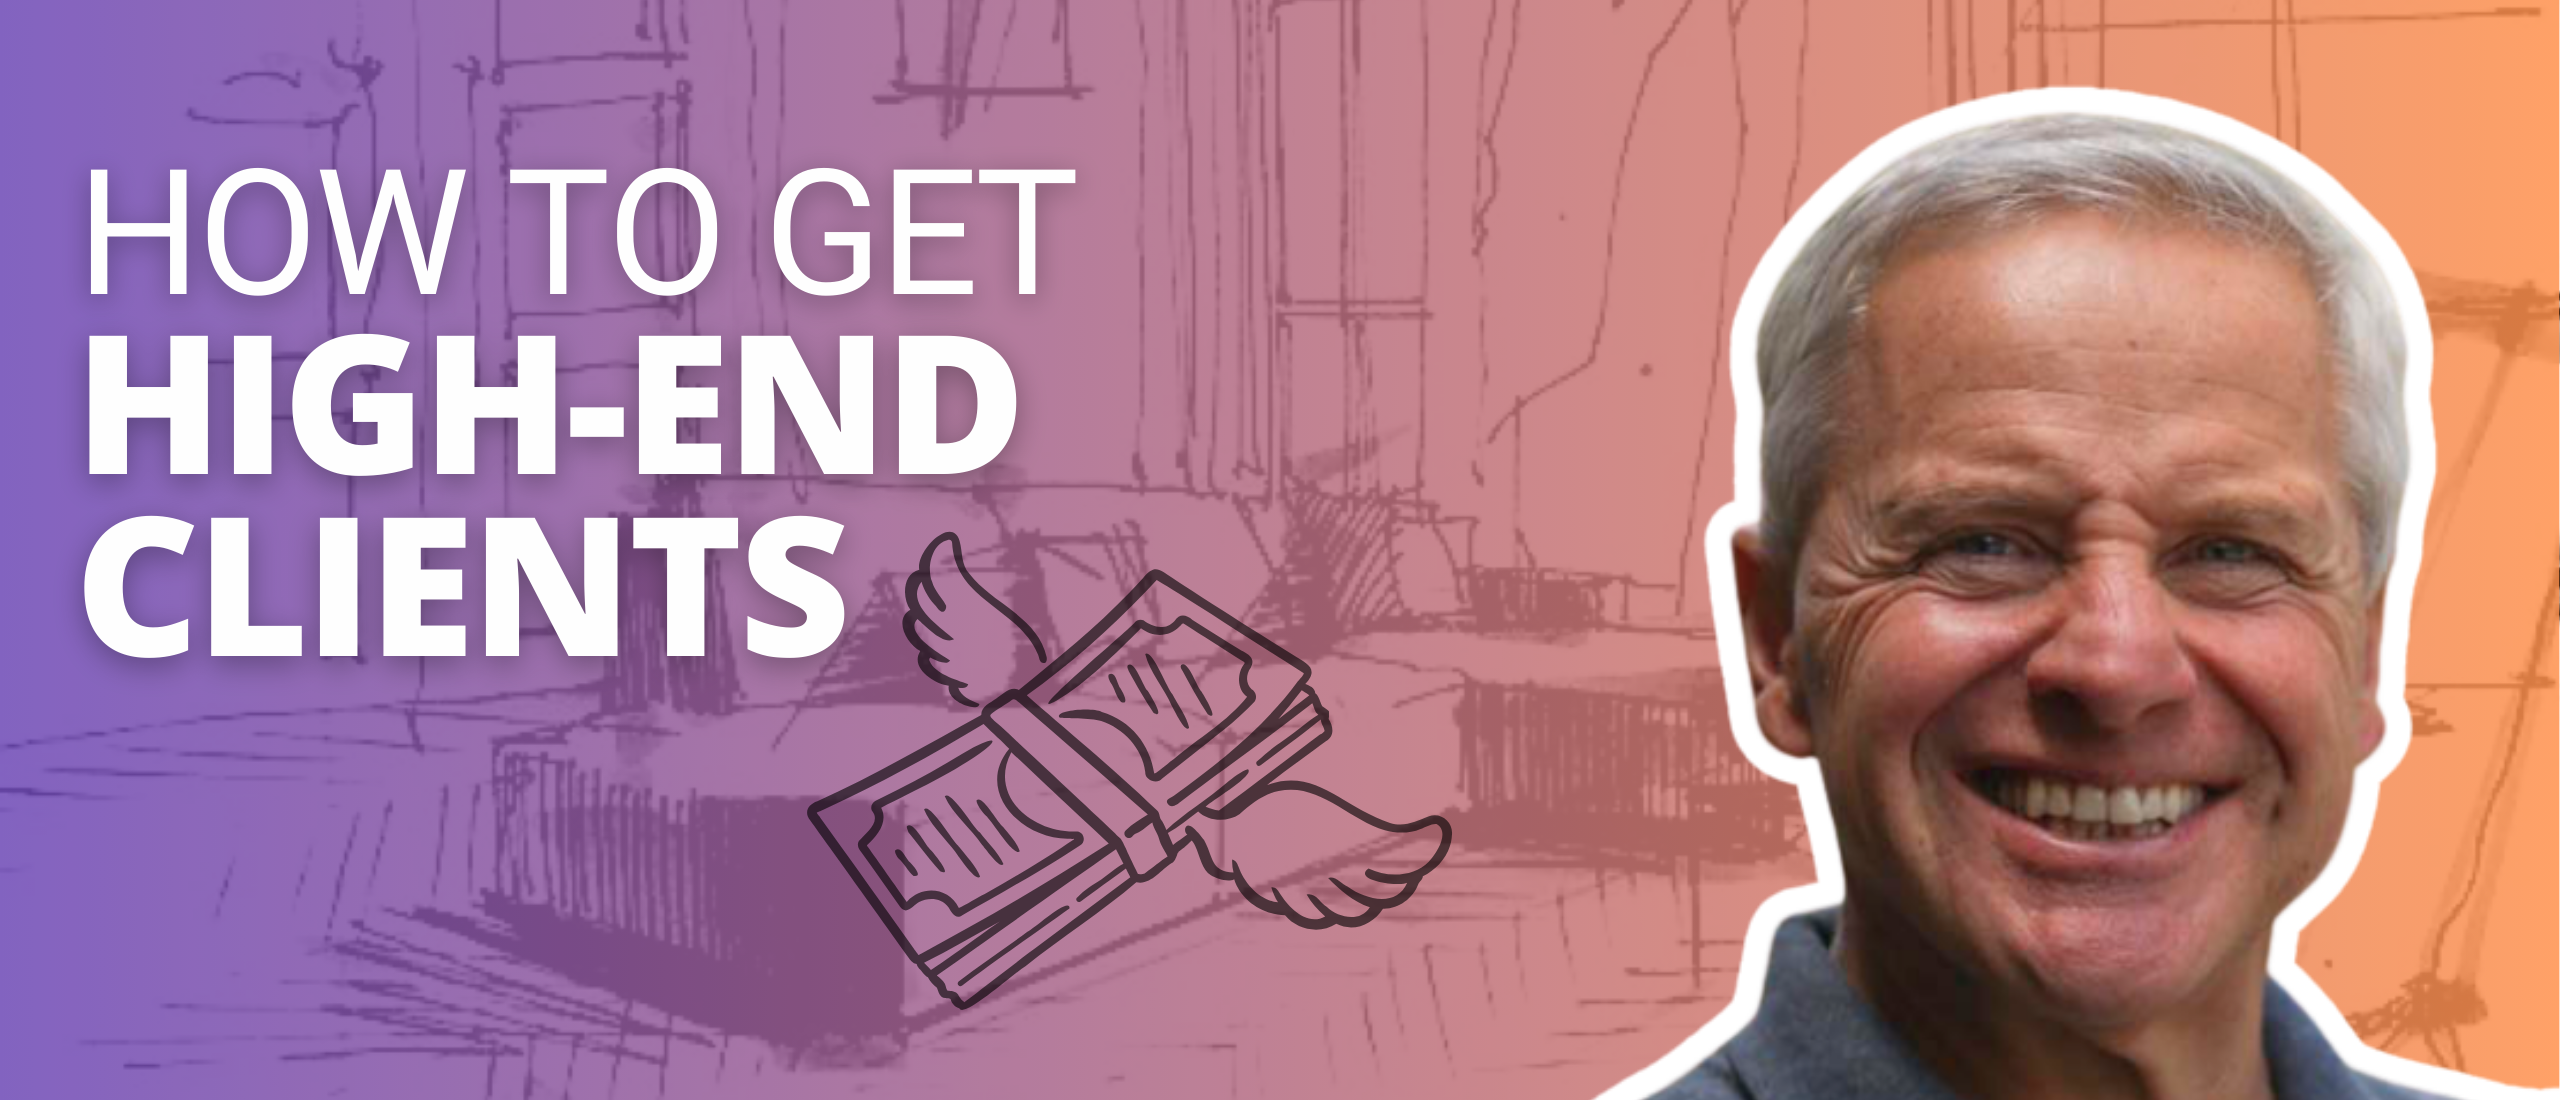 How To Get High-End Interior Design Clients - with Steve Griggs